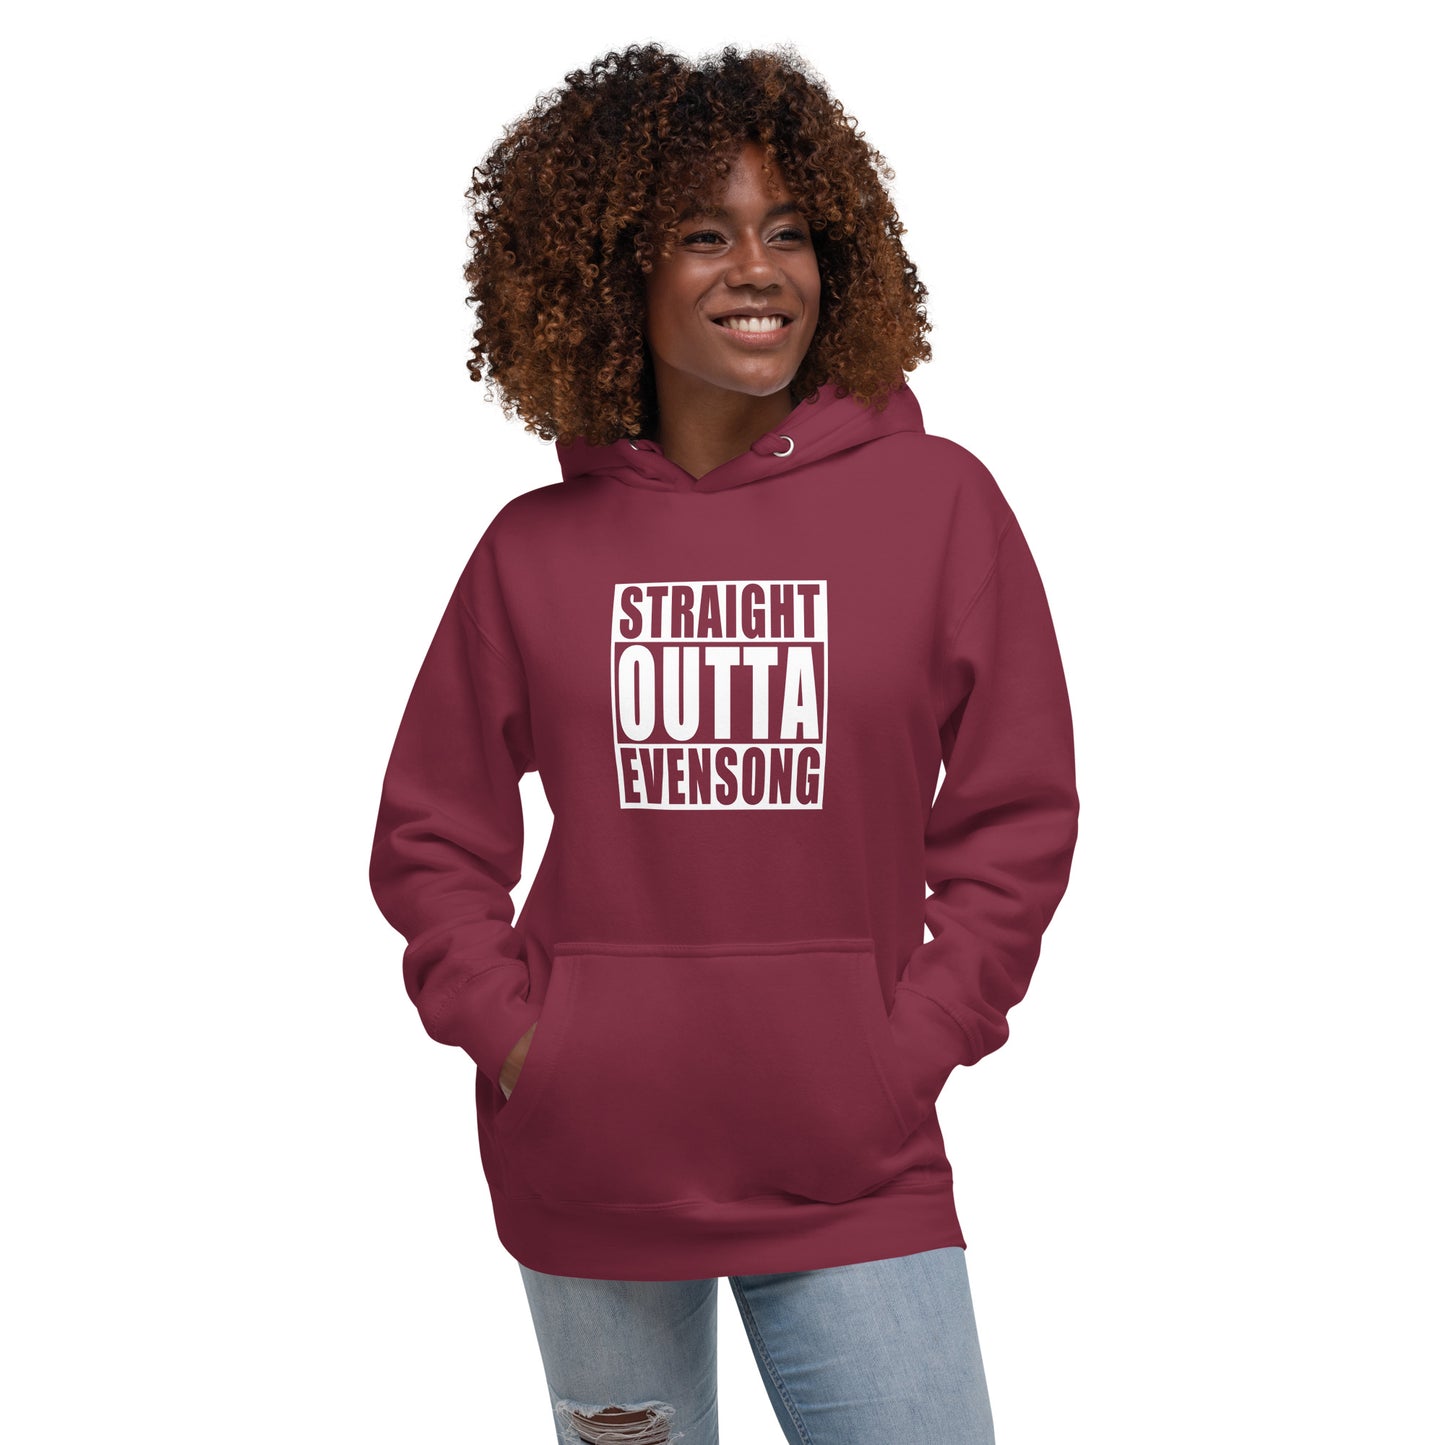 Straight Outta Evensong - Unisex Hoodie